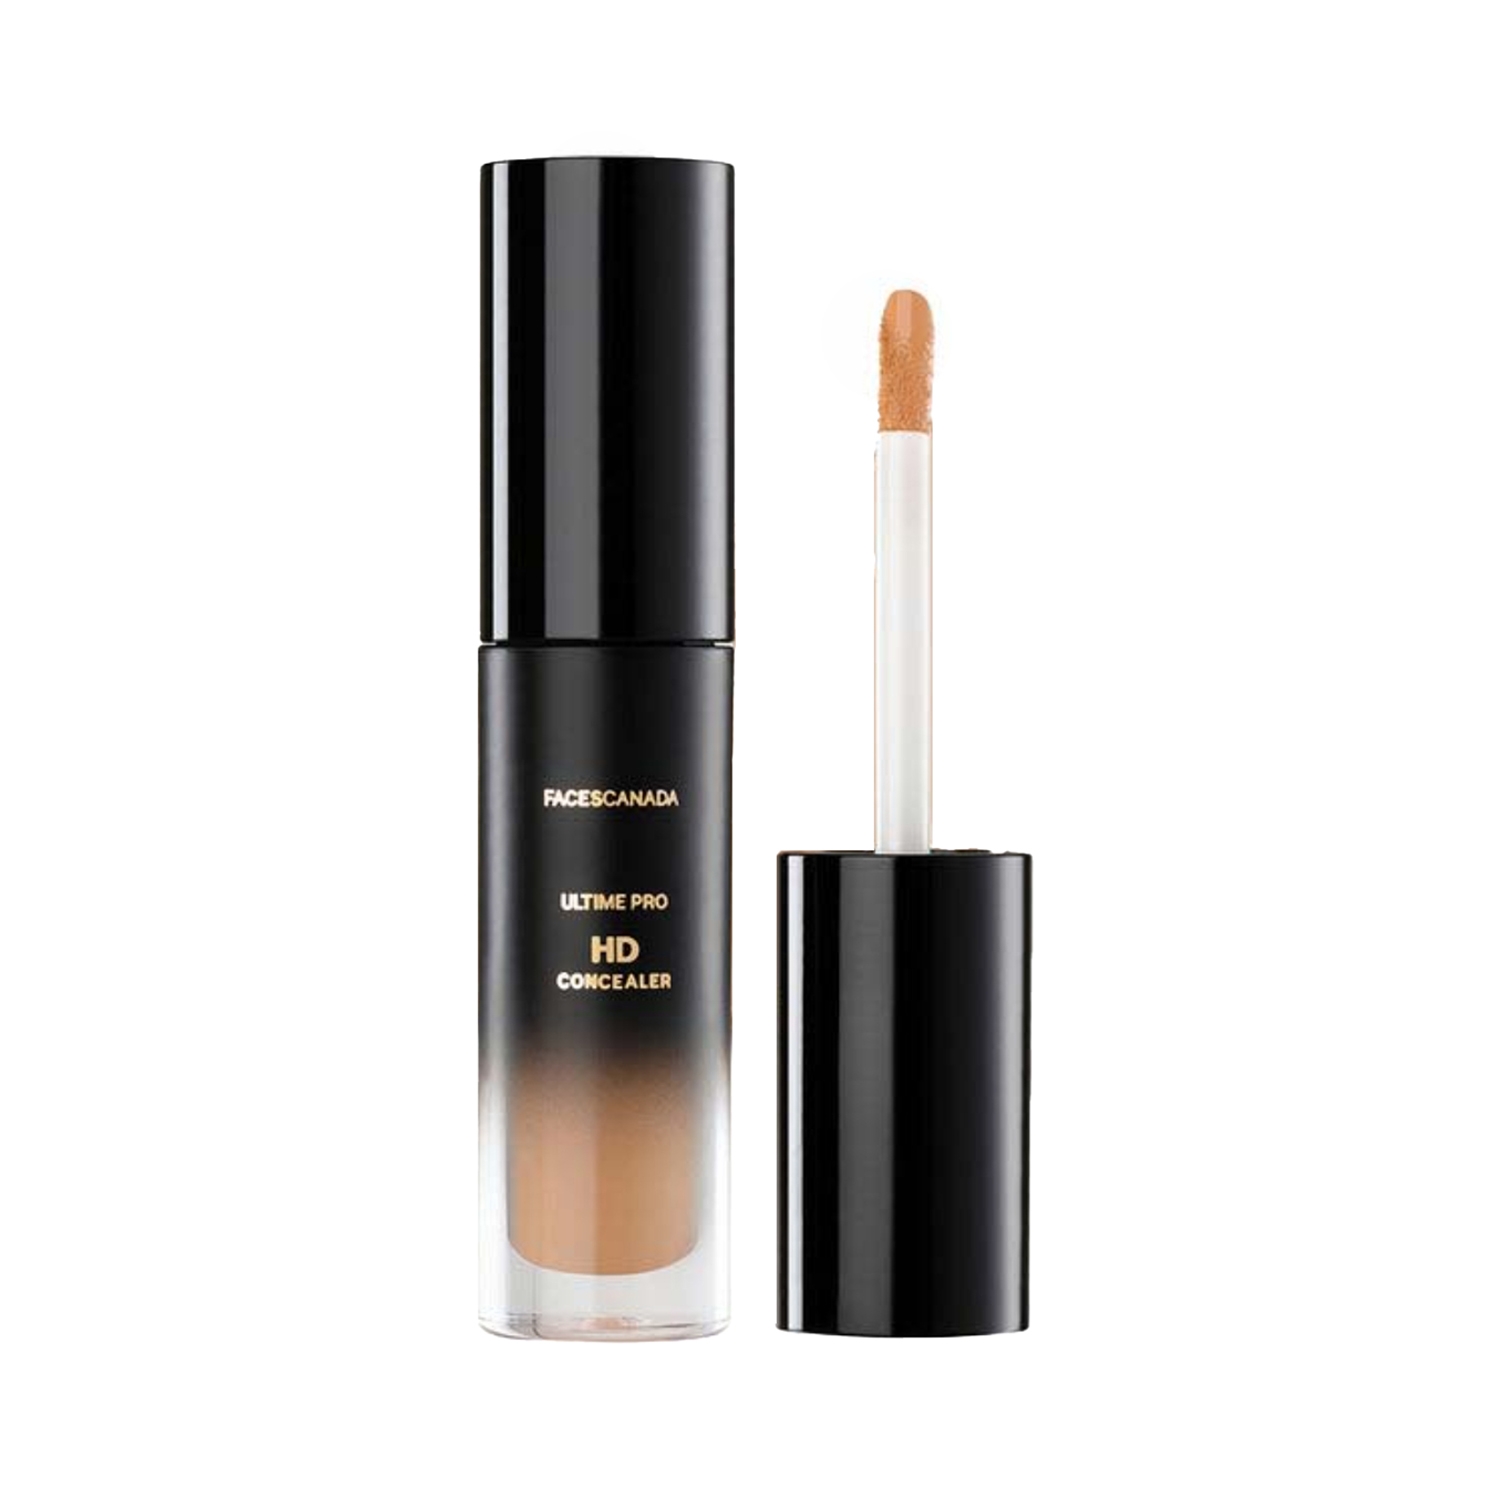 Faces Canada | Faces Canada Ultime Pro HD Concealer - 02 Honey Creme (3.8ml)